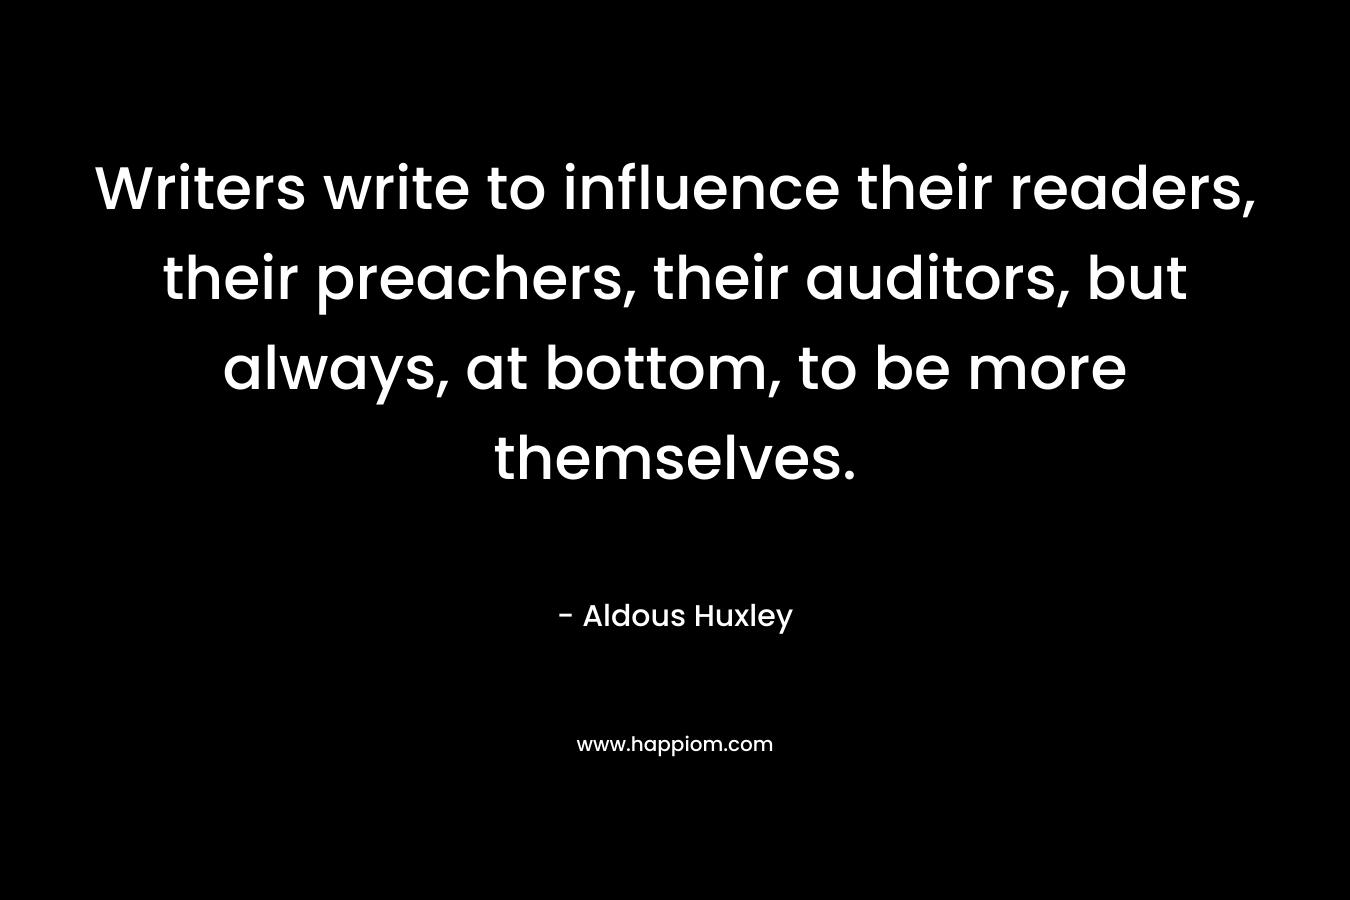 Writers write to influence their readers, their preachers, their auditors, but always, at bottom, to be more themselves. – Aldous Huxley